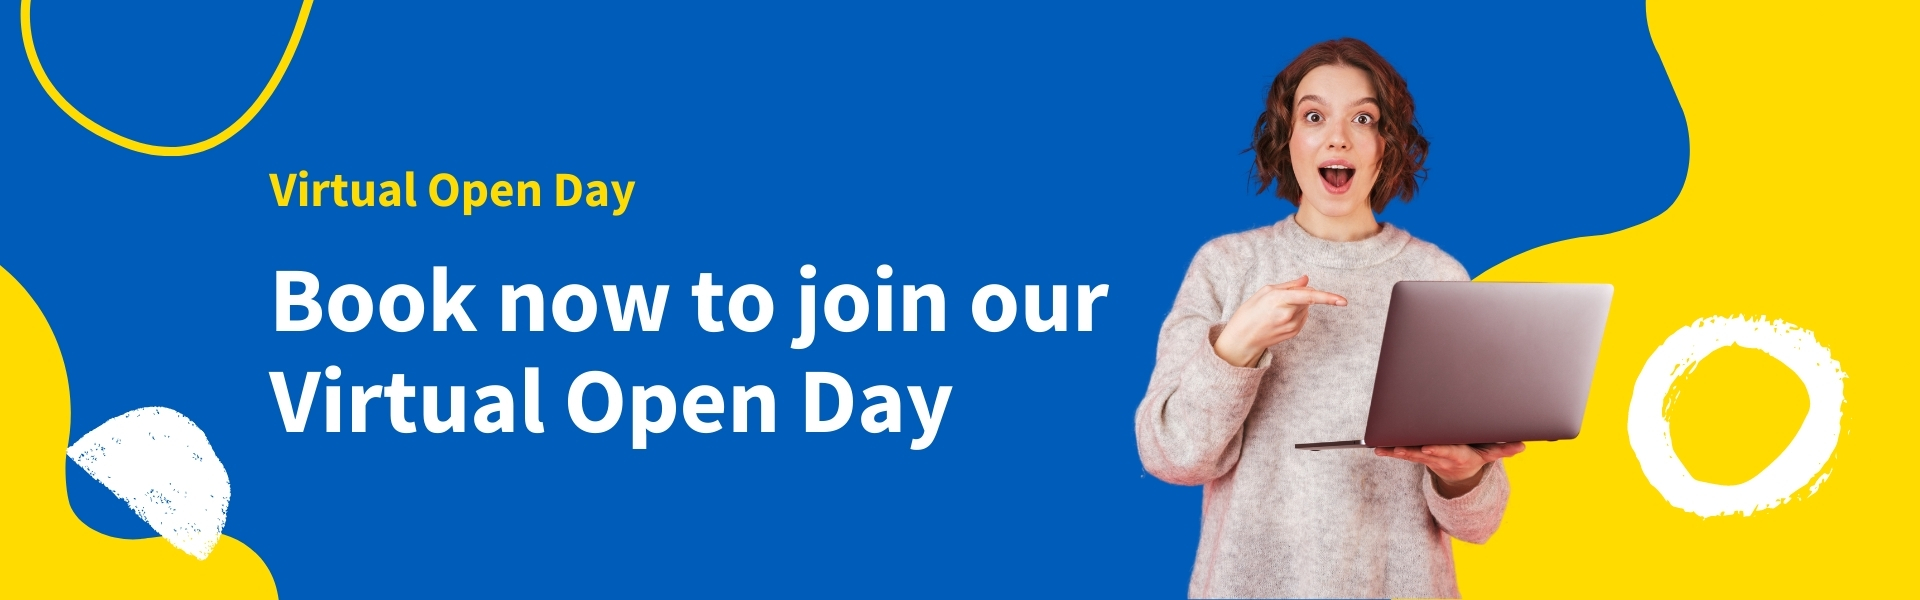 Book now to join our virtual open day